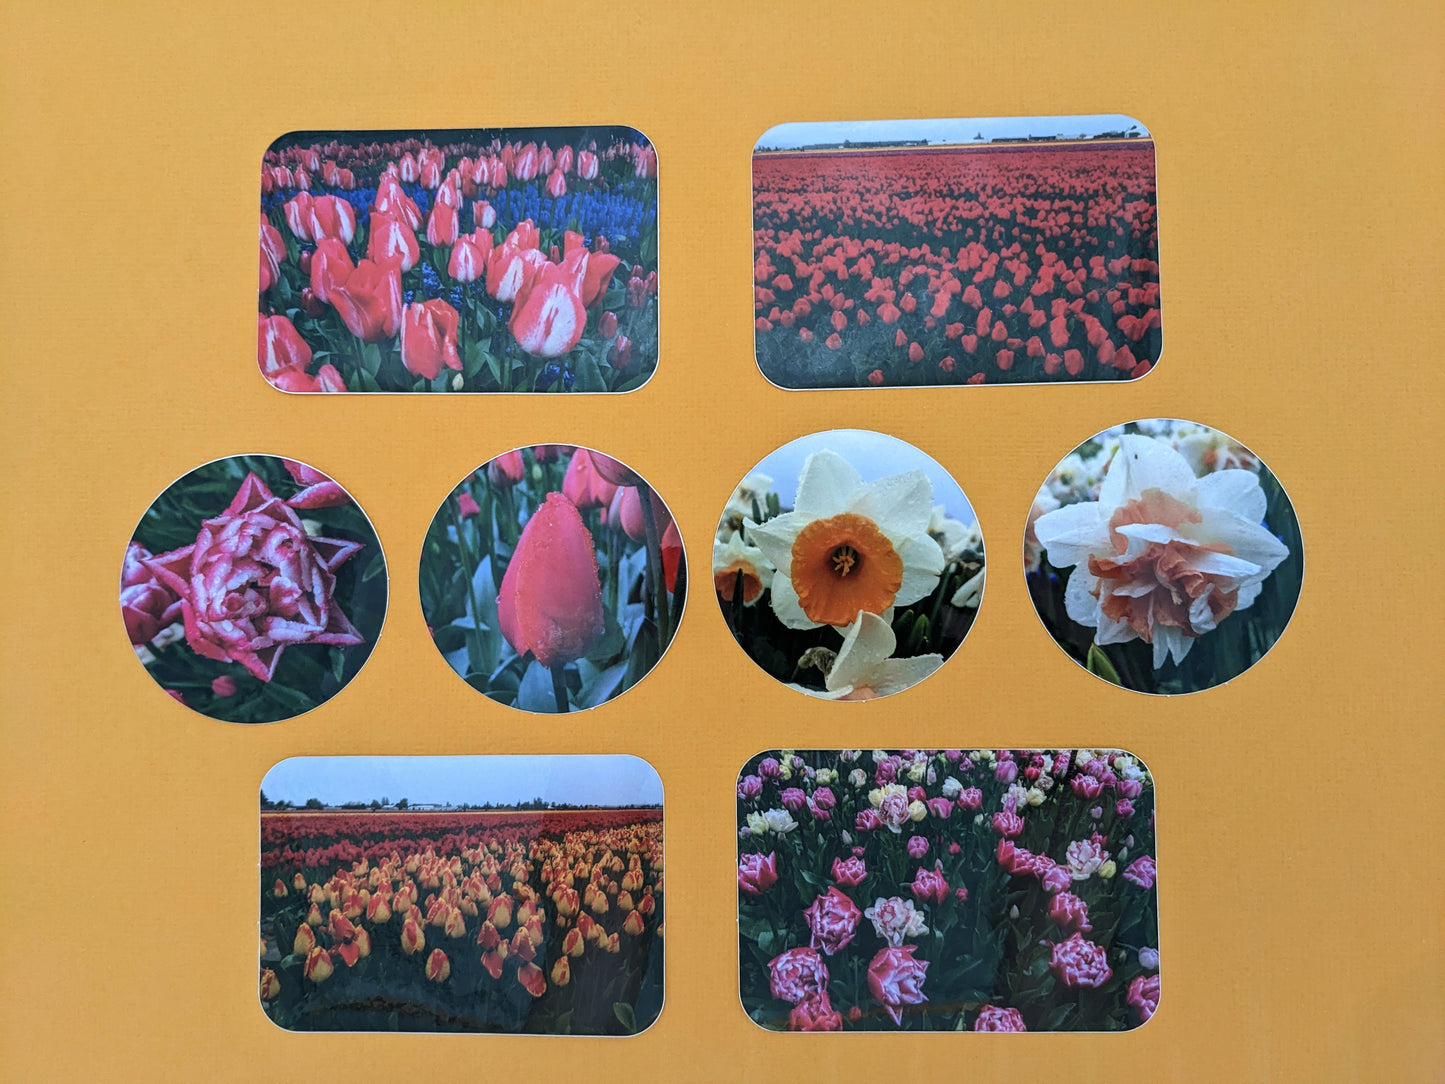 Red and Yellow Tulip Field Sticker